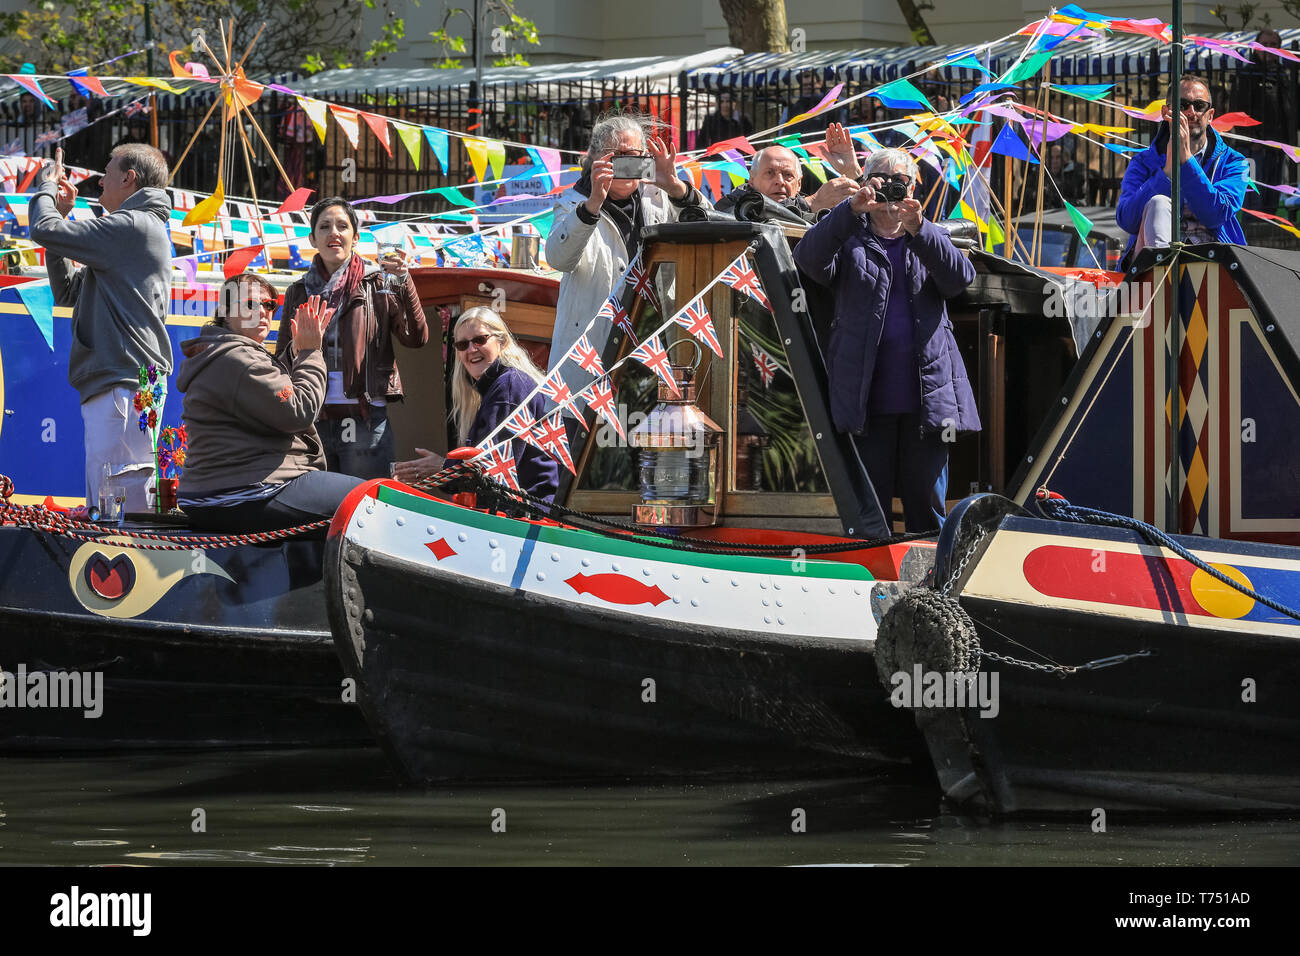 London, UK. 4th May, 2019. Decorated narrowboats take part in the IWA Canalway Cavalcade Festival opening ceremony and pageant along the canalways and in the basin, as friendly owners all wave to participants and spectators. The popular festivities are organised by the Inland Waterways Association and will run 4-6th May and will feature more than 100 boats this year with canal boat pageants, an illuminated boat parade, music, stage performances and water sports along pool and Grand Union Canal in Little Venice.Little Venice, London, UK, 4th May 2019. Credit: Imageplotter/Alamy Live News Stock Photo